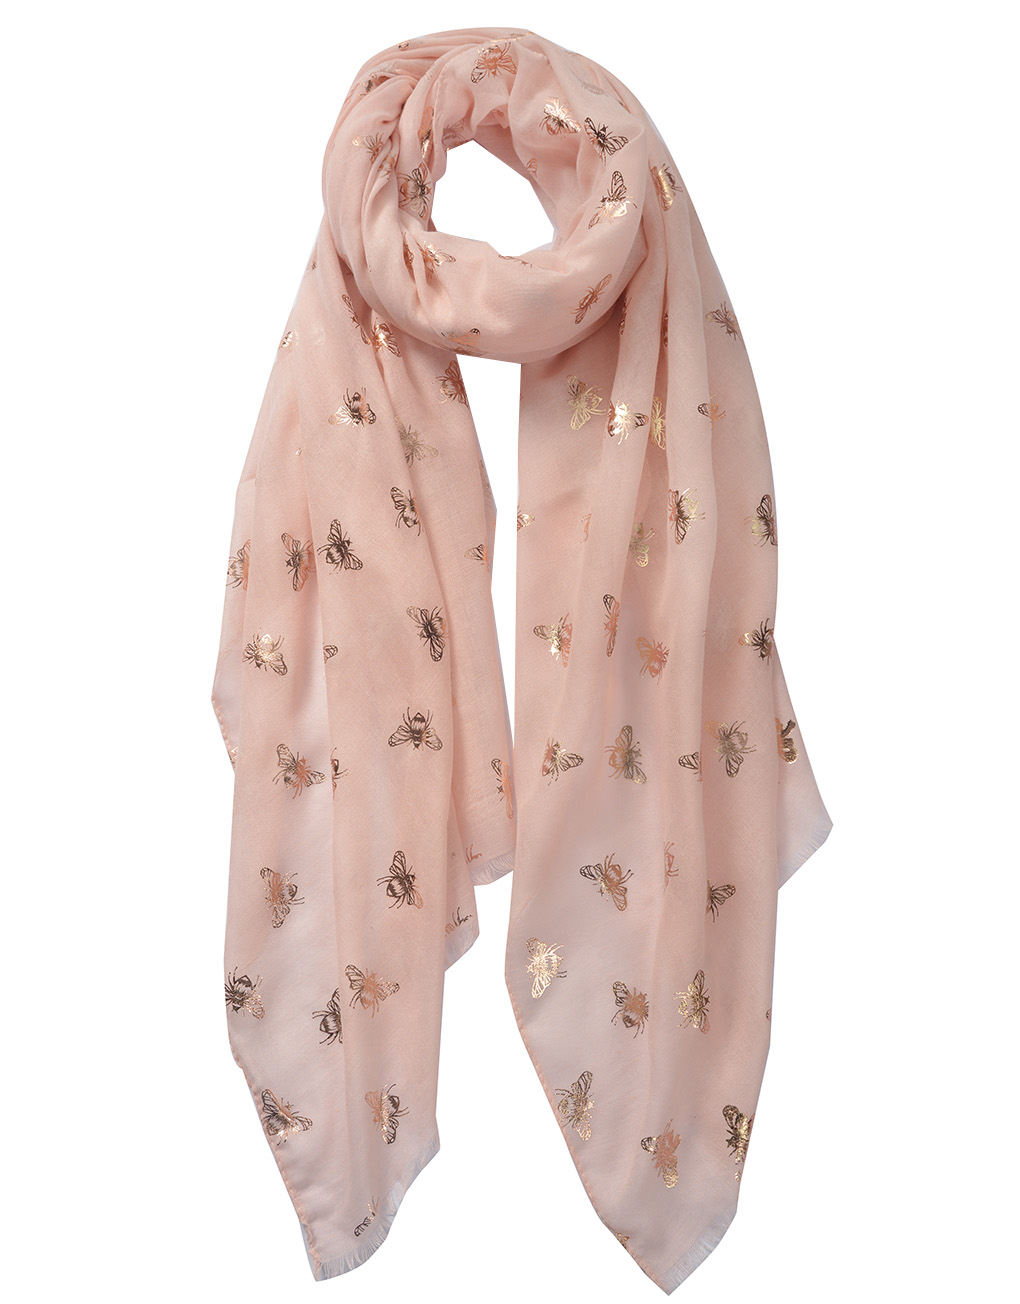 PINK BEE PRINT SCARF BUMBLE BEE FOIL PRINT  WITH SILVER METALLIC PRINT 